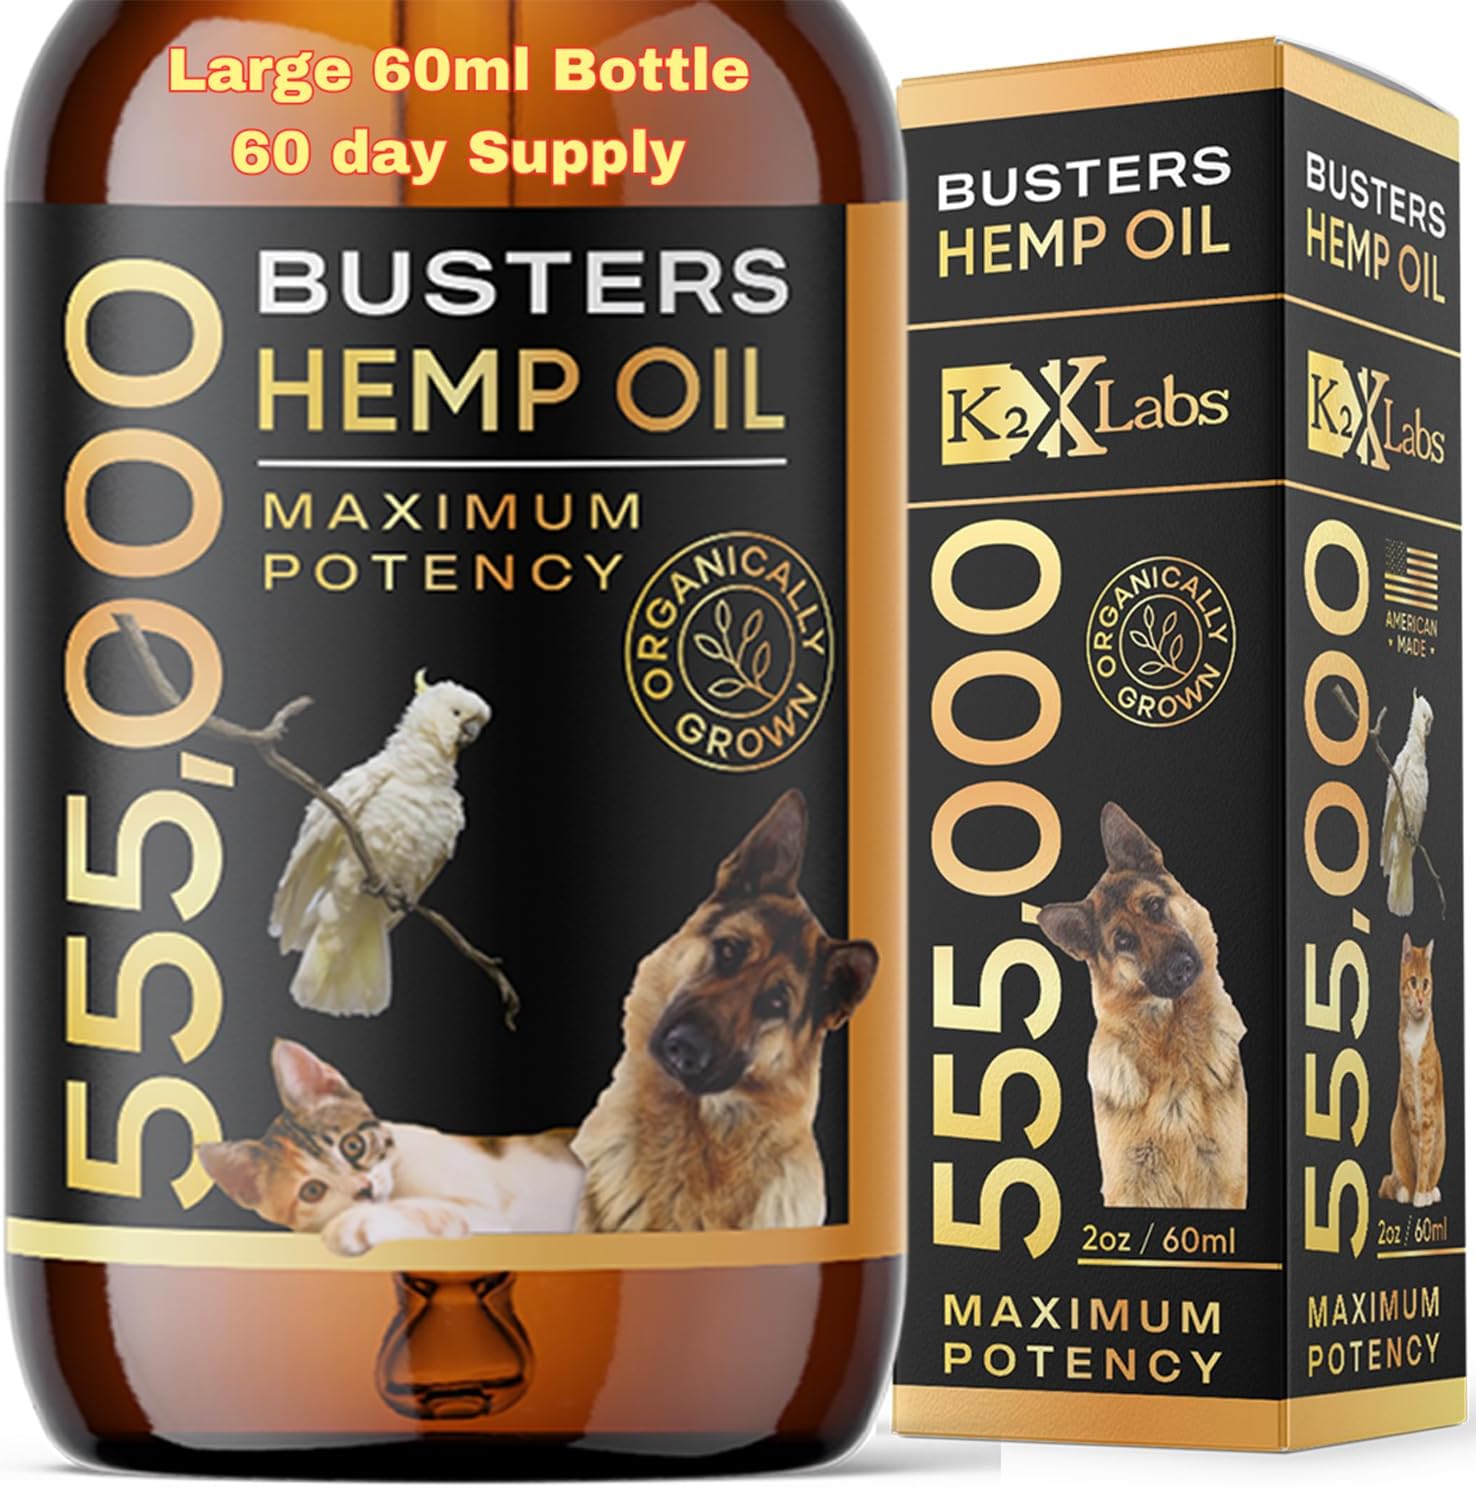 Buster's Large 60ml Bottle, 2mth Supply, Organic Hemp Oil for Dogs and Pets, 555,000 Max Potency, Made in USA - Miracle Formula, Perfectly Balanced Omega 3, 6, 9 - Joint Relief, Calming